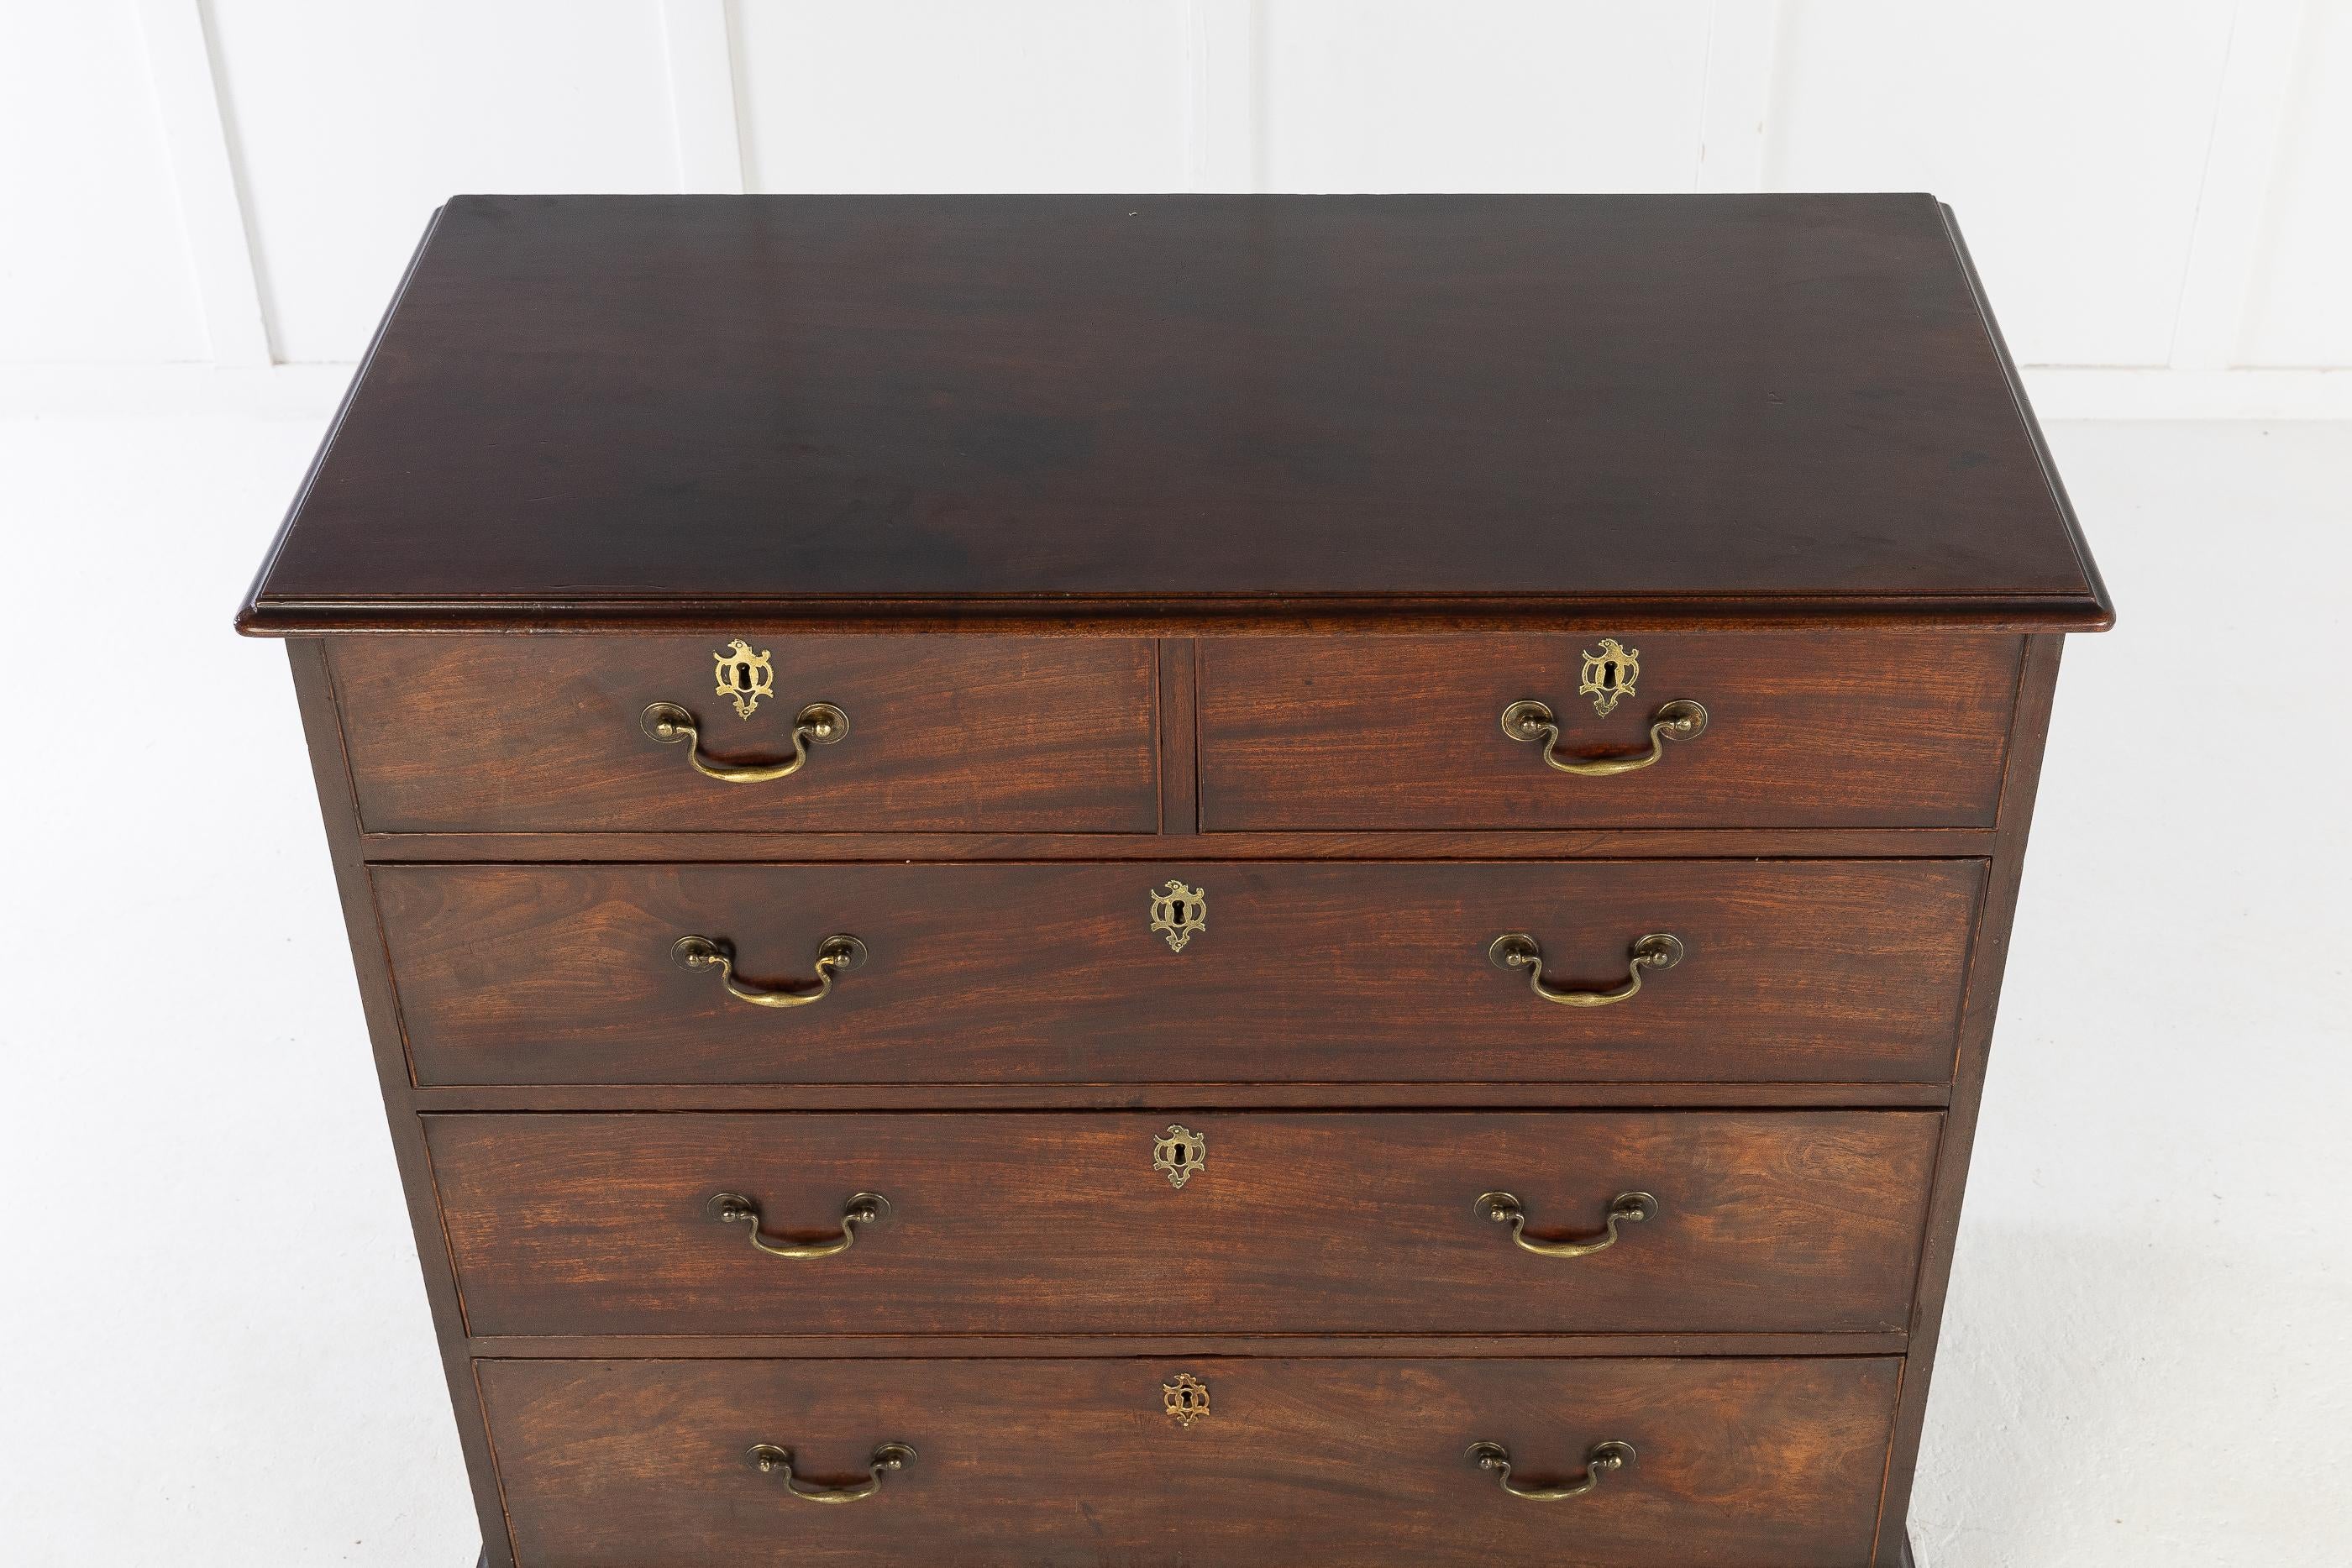 18th Century and Earlier 18th Century English Mahogany Chest of Drawers